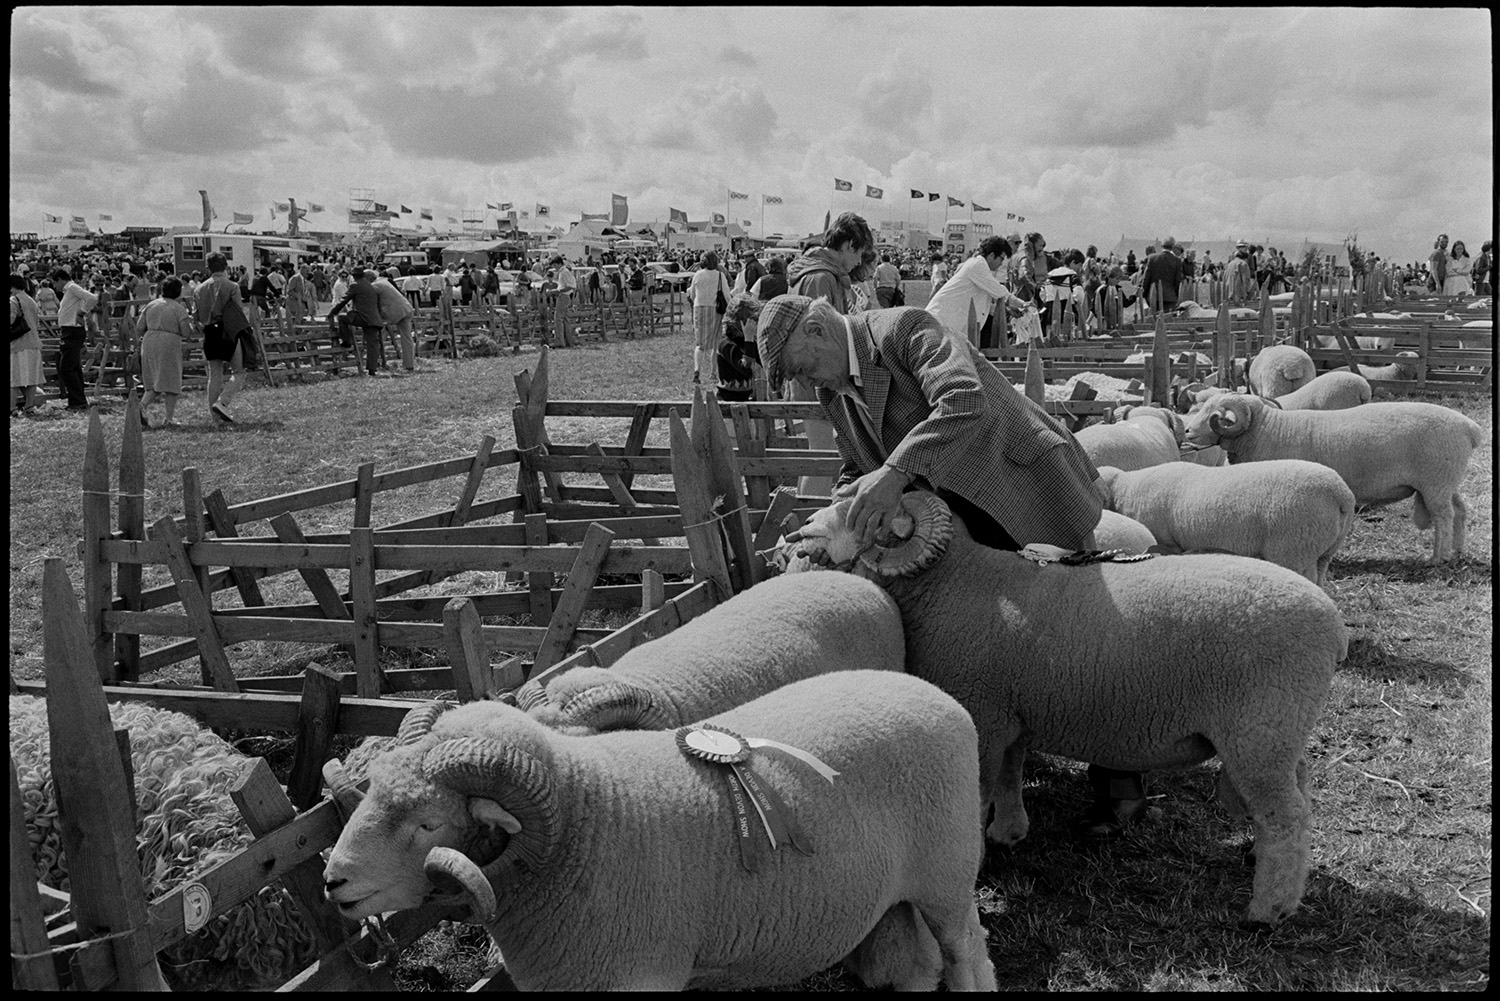 North Devon Show, Prize cattle, sheep, people having teas, woman, mother and baby.
[Judge inspecting rams at the North Devon Show, near Alverdiscott, alongside sheep pens. Visitors, other pens, flags and marquees are visible in the background.]